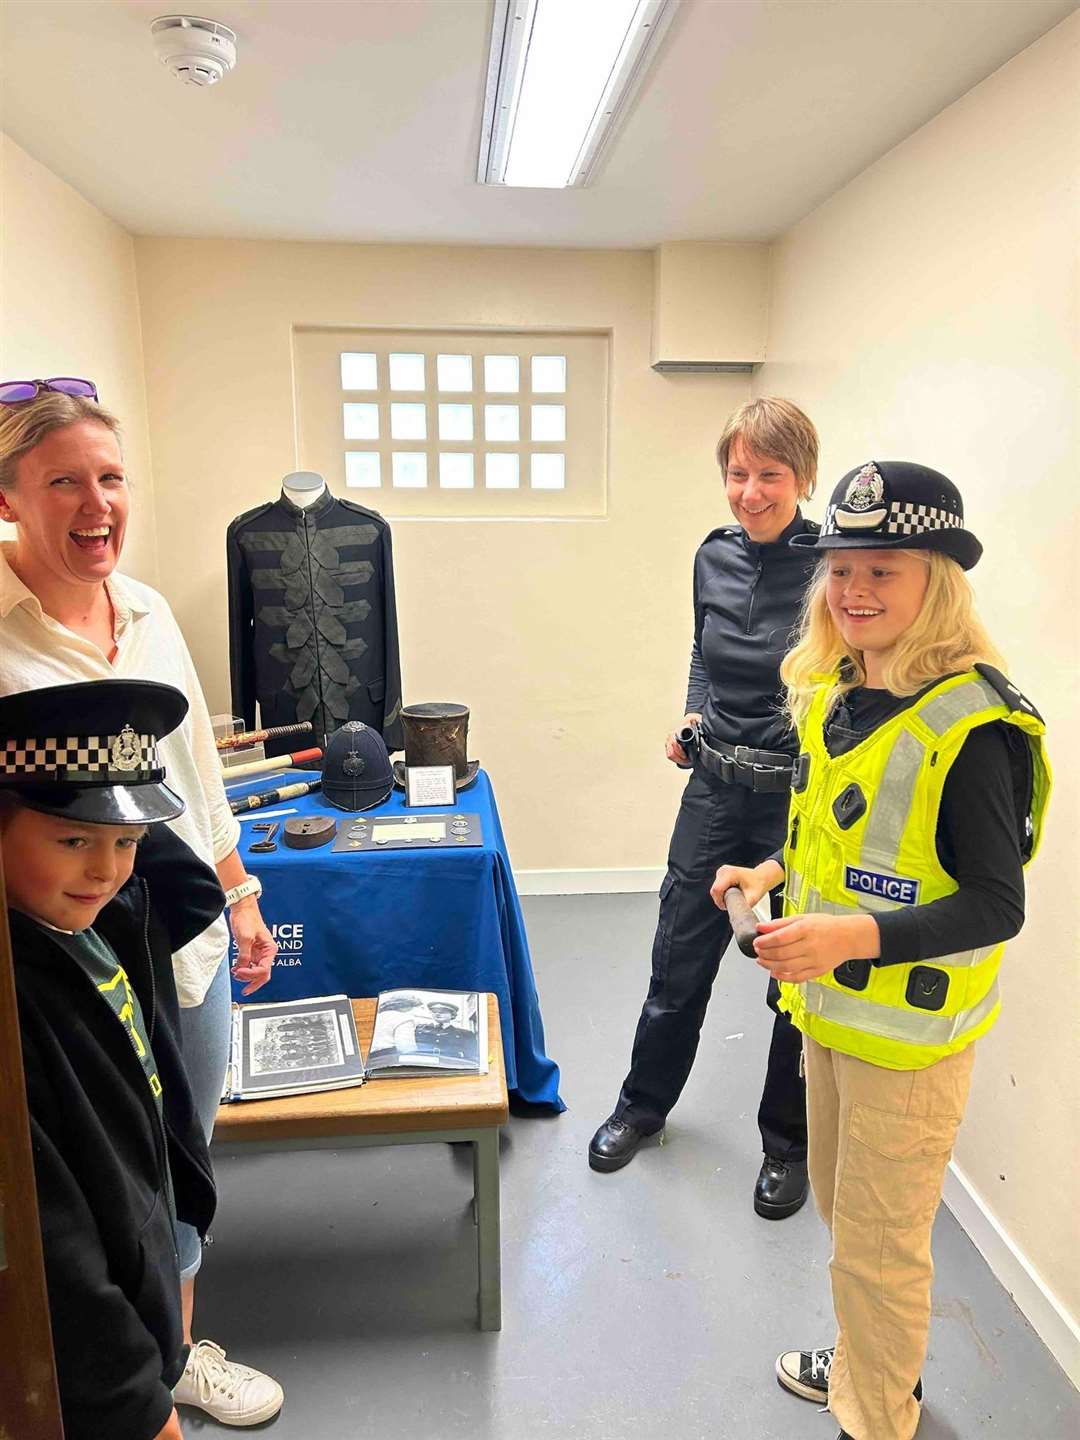 Inspector Claire Smith with her exhibition of old police uniform and equipment.